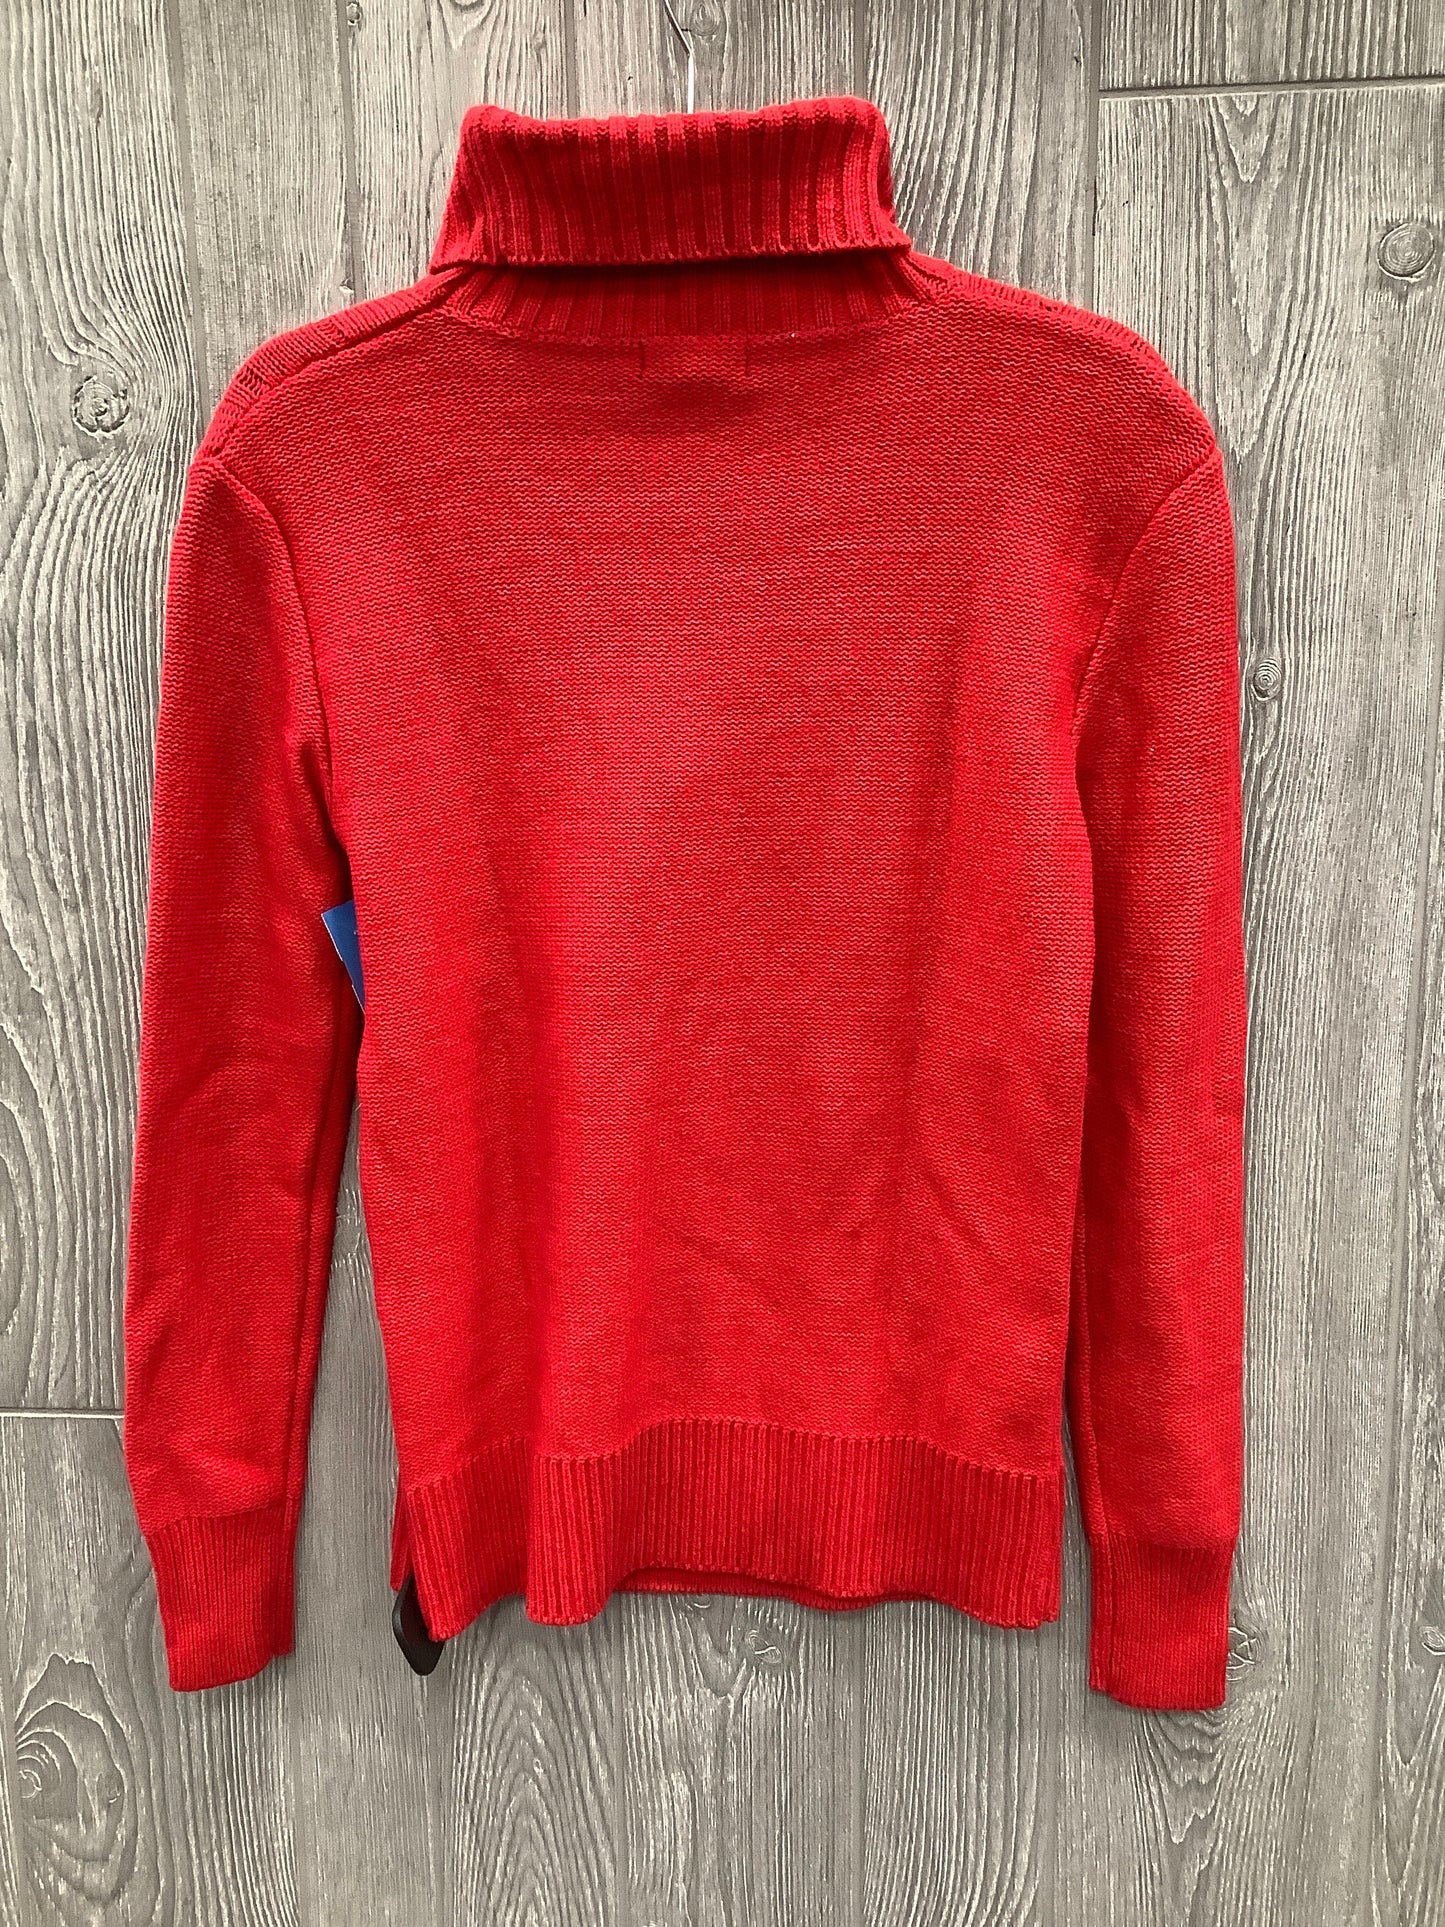 Sweater By Gap O  Size: S